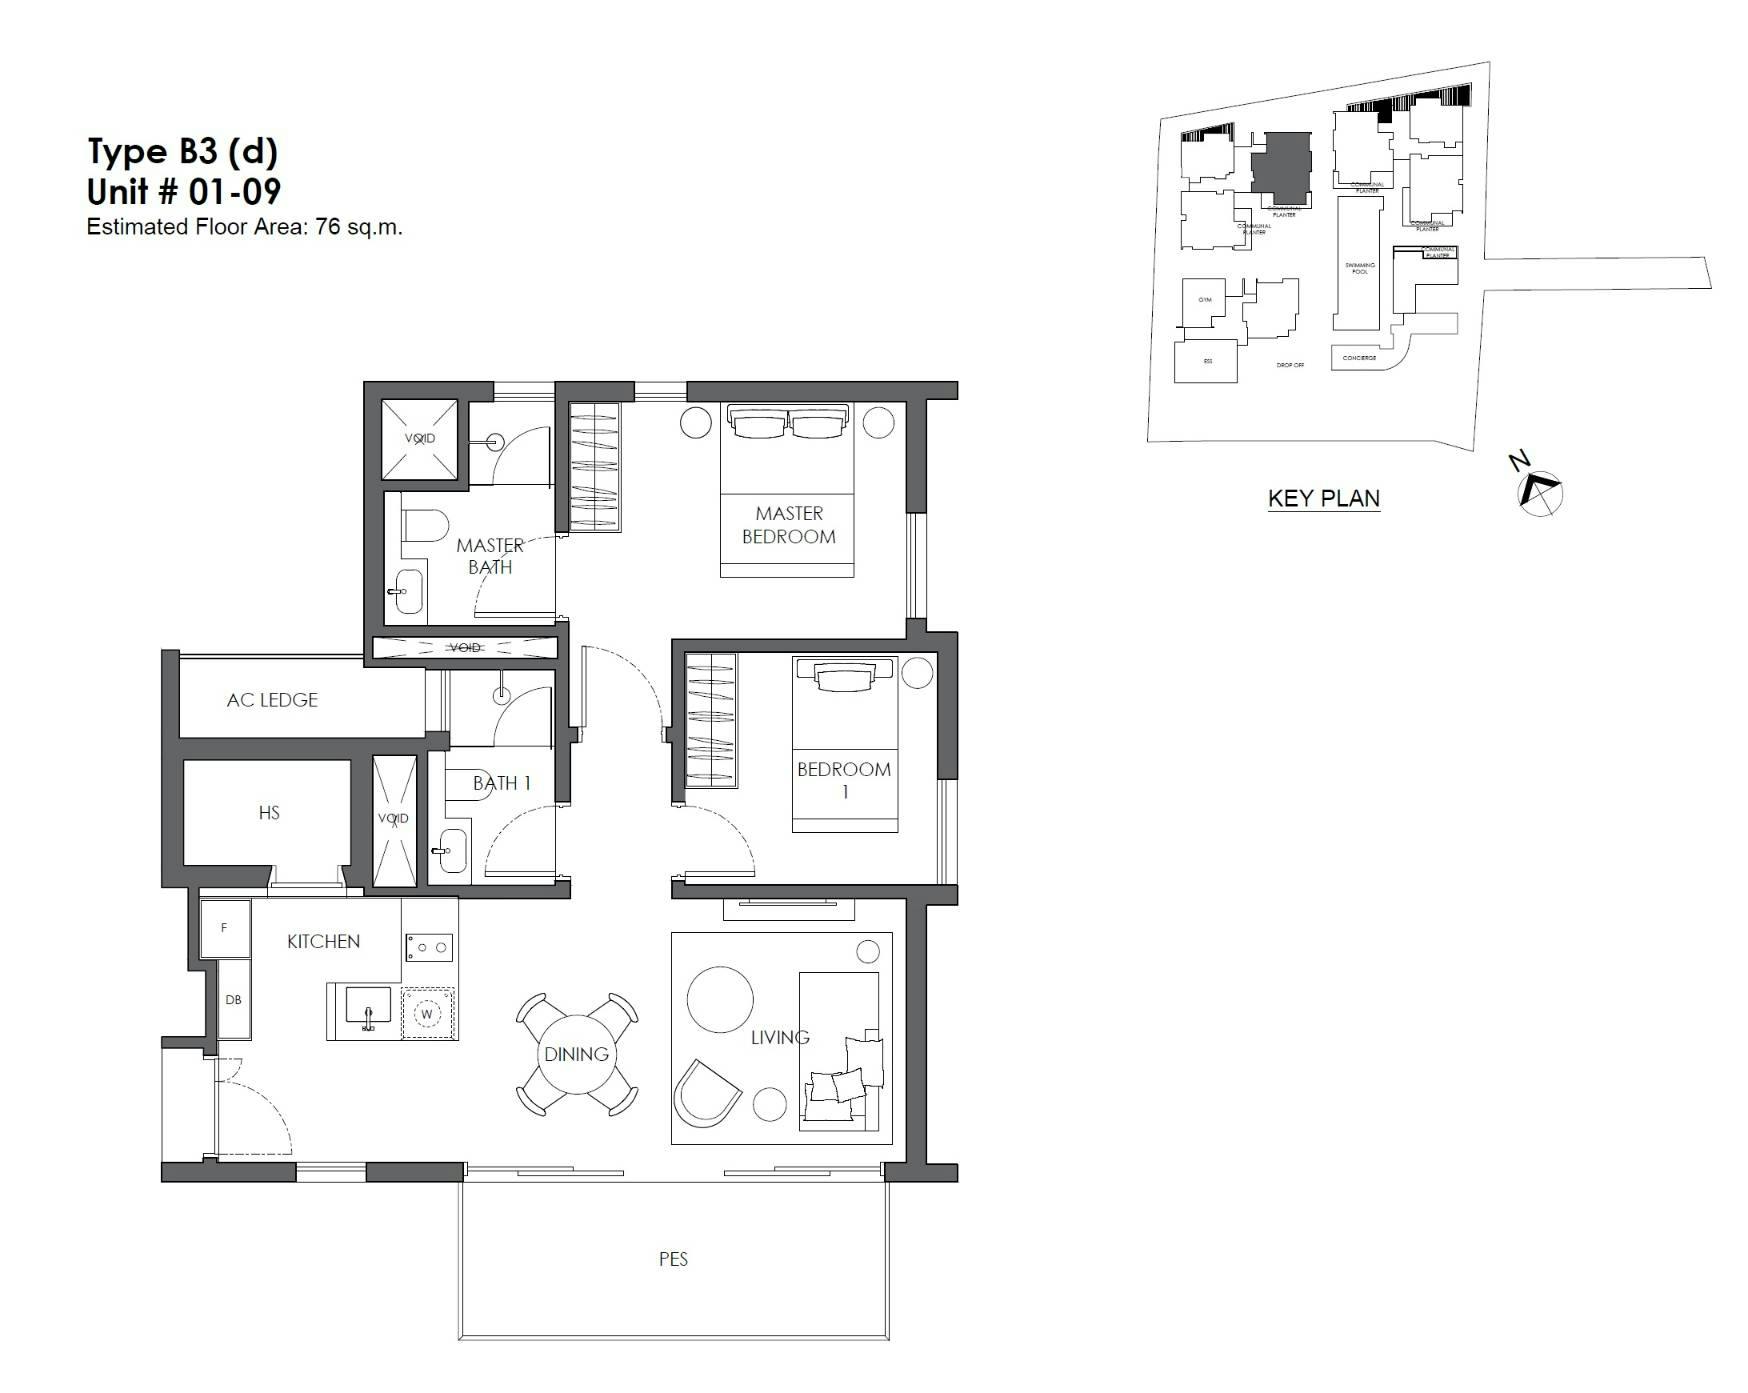 10 Evelyn 2 Bedrooms B3d